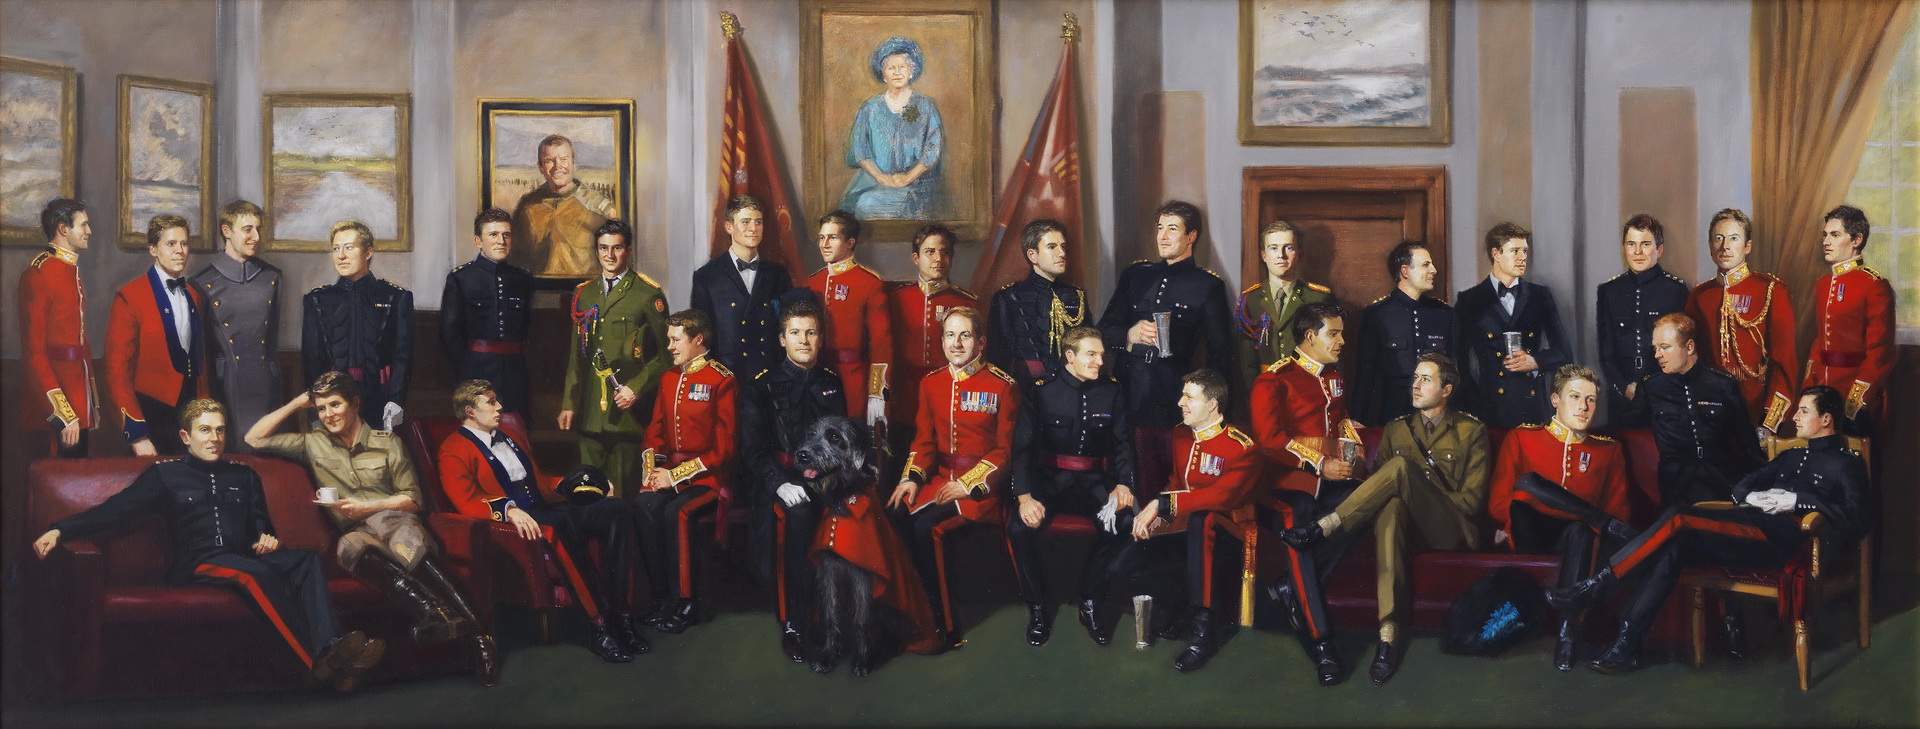 30 Officers of the Irish Guards, painted in the Officer's mess with the portrait of the Queen Mother looking down.